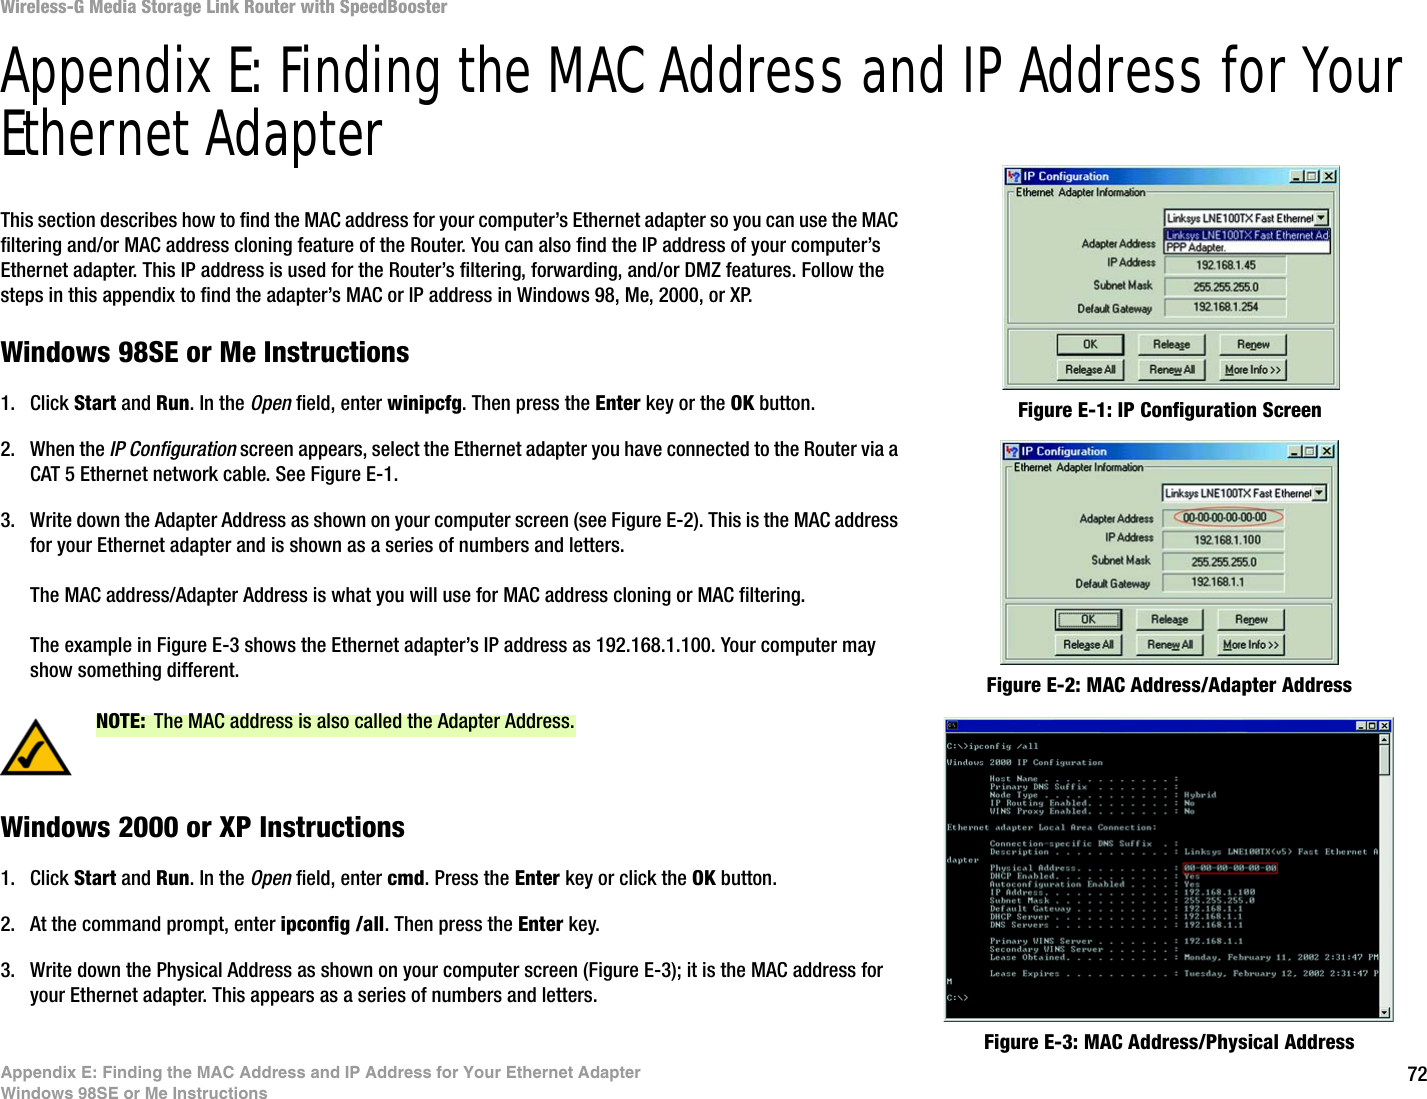 72Appendix E: Finding the MAC Address and IP Address for Your Ethernet AdapterWindows 98SE or Me InstructionsWireless-G Media Storage Link Router with SpeedBoosterAppendix E: Finding the MAC Address and IP Address for Your Ethernet AdapterThis section describes how to find the MAC address for your computer’s Ethernet adapter so you can use the MAC filtering and/or MAC address cloning feature of the Router. You can also find the IP address of your computer’s Ethernet adapter. This IP address is used for the Router’s filtering, forwarding, and/or DMZ features. Follow the steps in this appendix to find the adapter’s MAC or IP address in Windows 98, Me, 2000, or XP.Windows 98SE or Me Instructions1. Click Start and Run. In the Open field, enter winipcfg. Then press the Enter key or the OK button. 2. When the IP Configuration screen appears, select the Ethernet adapter you have connected to the Router via a CAT 5 Ethernet network cable. See Figure E-1.3. Write down the Adapter Address as shown on your computer screen (see Figure E-2). This is the MAC address for your Ethernet adapter and is shown as a series of numbers and letters.The MAC address/Adapter Address is what you will use for MAC address cloning or MAC filtering.The example in Figure E-3 shows the Ethernet adapter’s IP address as 192.168.1.100. Your computer may show something different.Windows 2000 or XP Instructions1. Click Start and Run. In the Open field, enter cmd. Press the Enter key or click the OK button.2. At the command prompt, enter ipconfig /all. Then press the Enter key.3. Write down the Physical Address as shown on your computer screen (Figure E-3); it is the MAC address for your Ethernet adapter. This appears as a series of numbers and letters.Figure E-2: MAC Address/Adapter AddressFigure E-1: IP Configuration ScreenNOTE: The MAC address is also called the Adapter Address.Figure E-3: MAC Address/Physical Address